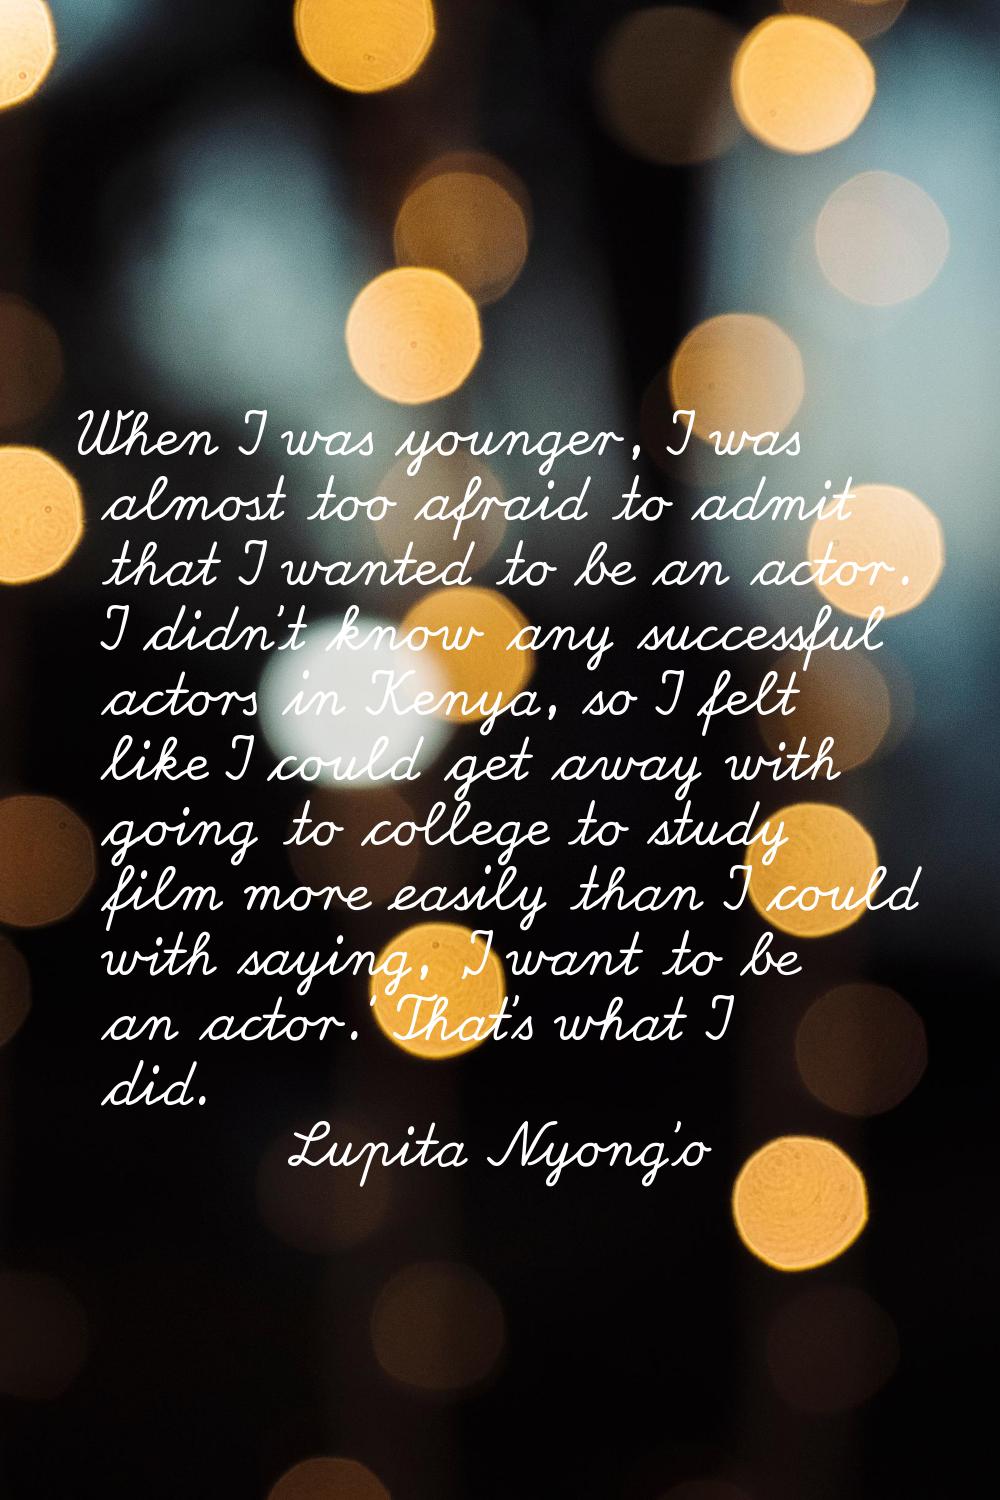 When I was younger, I was almost too afraid to admit that I wanted to be an actor. I didn't know an